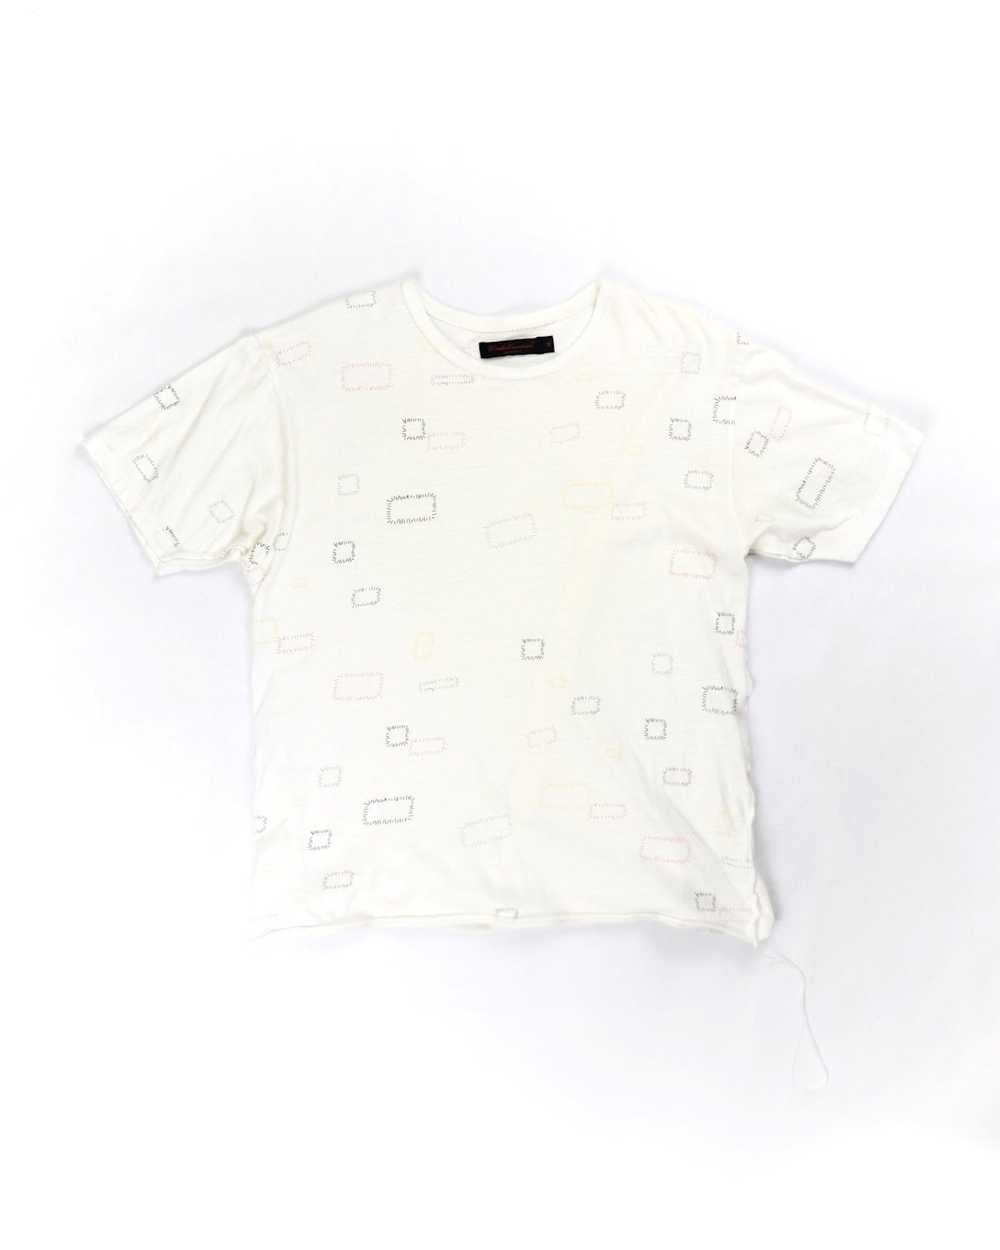 Undercover Undercover SS03 “Scab” Tee - image 1